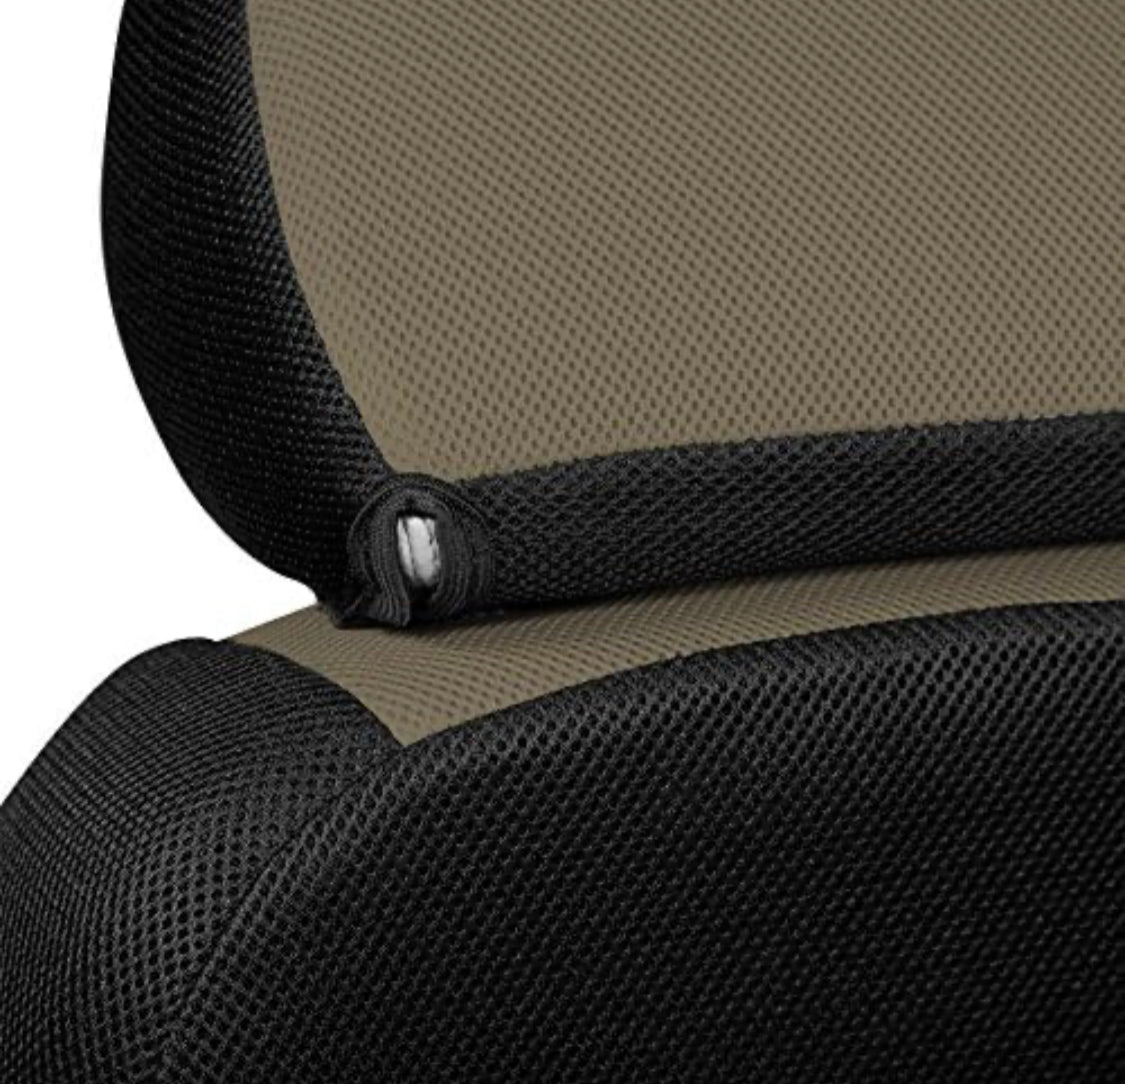 Coverking Custom Fit Front 50/50 Bucket Seat Cover for Select Jeep Wrangler Models - Spacermesh 2-Tone (Taupe with Black Sides)